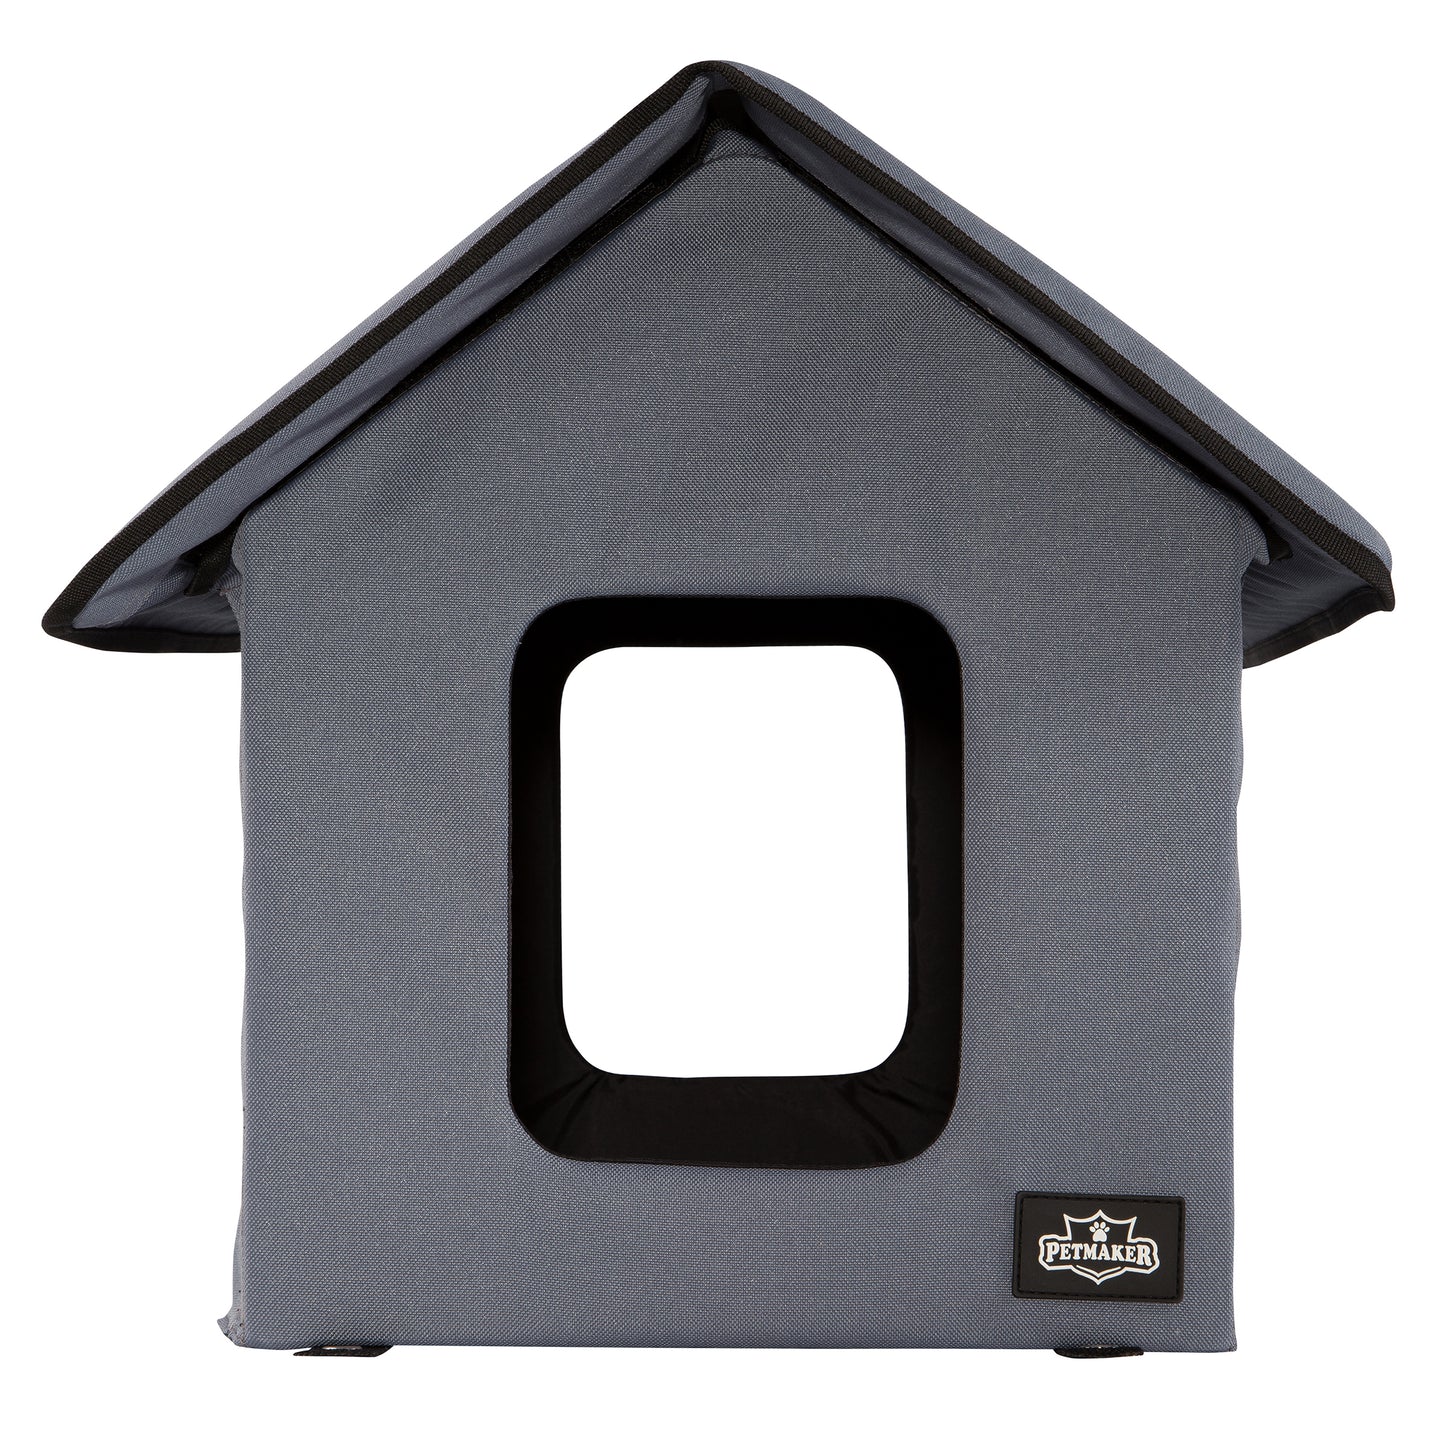 Heated Cat House with Sherpa Pad